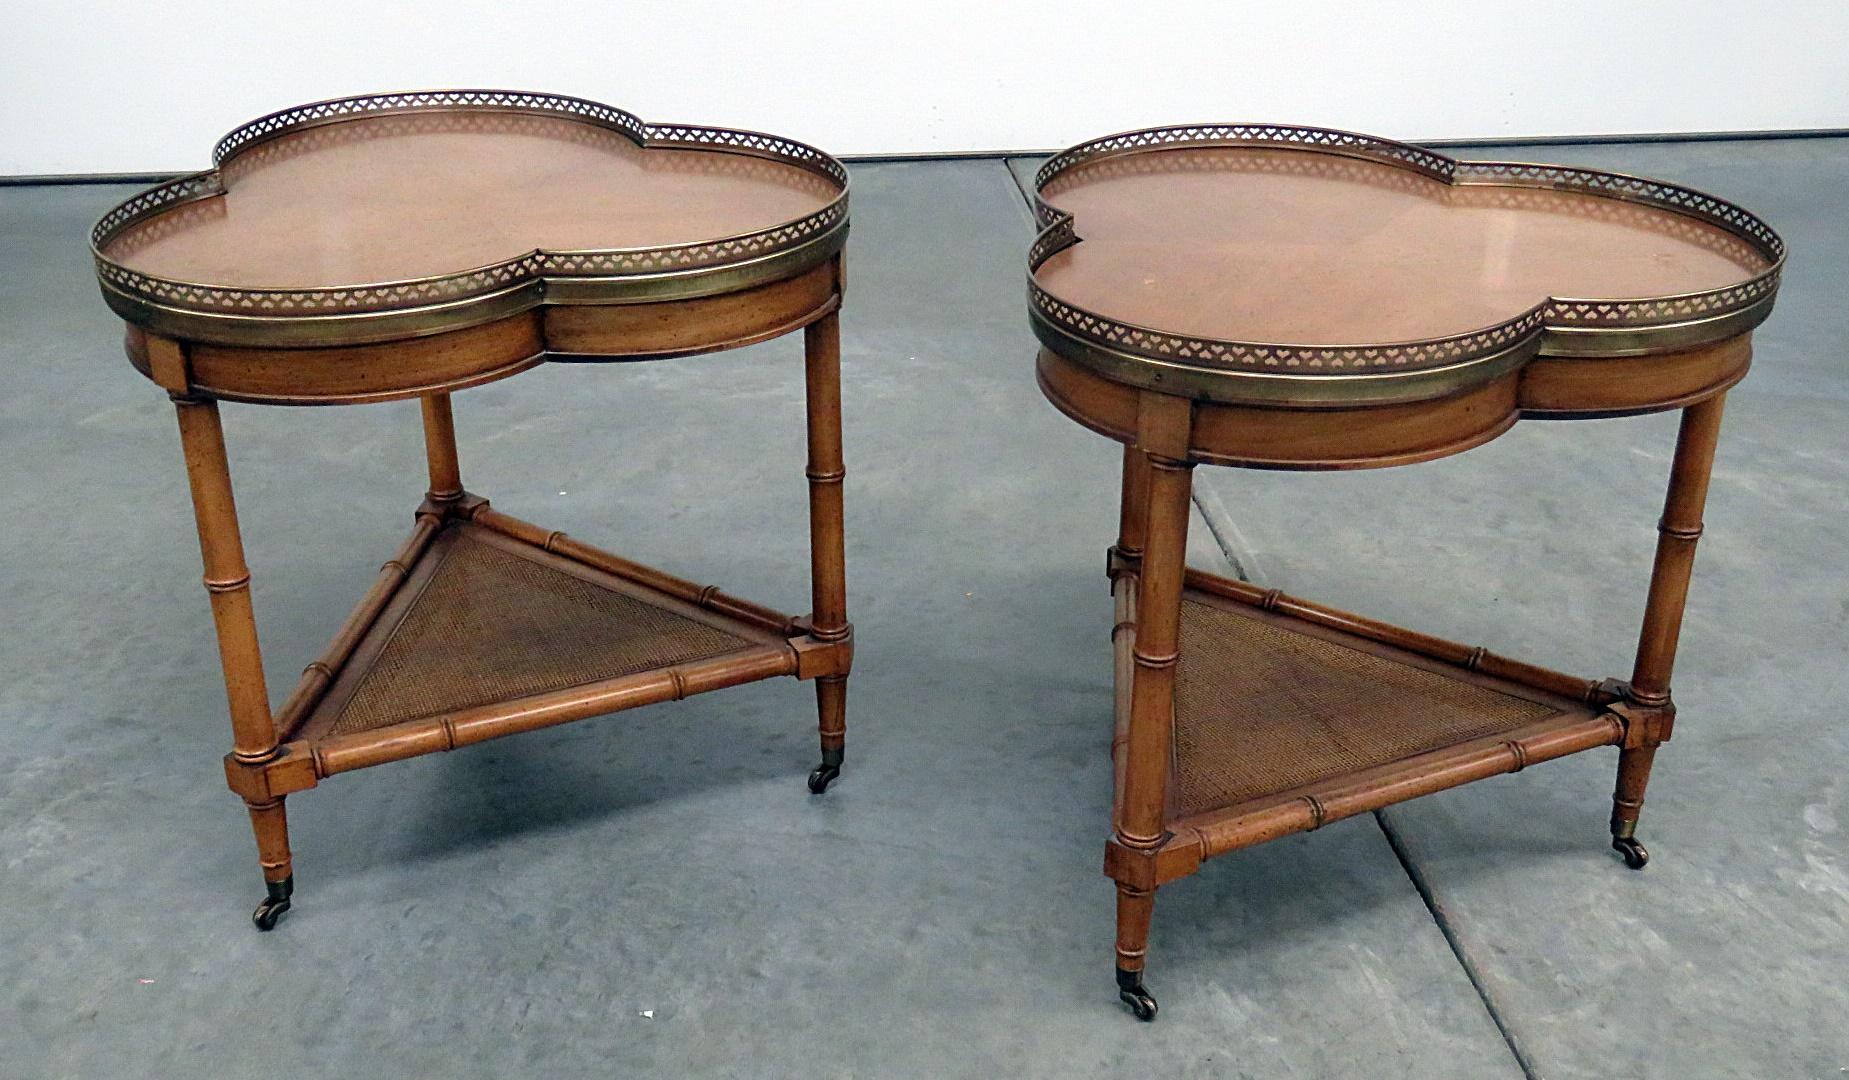 Pair of 2-tier faux bamboo side tables with brass galleries.